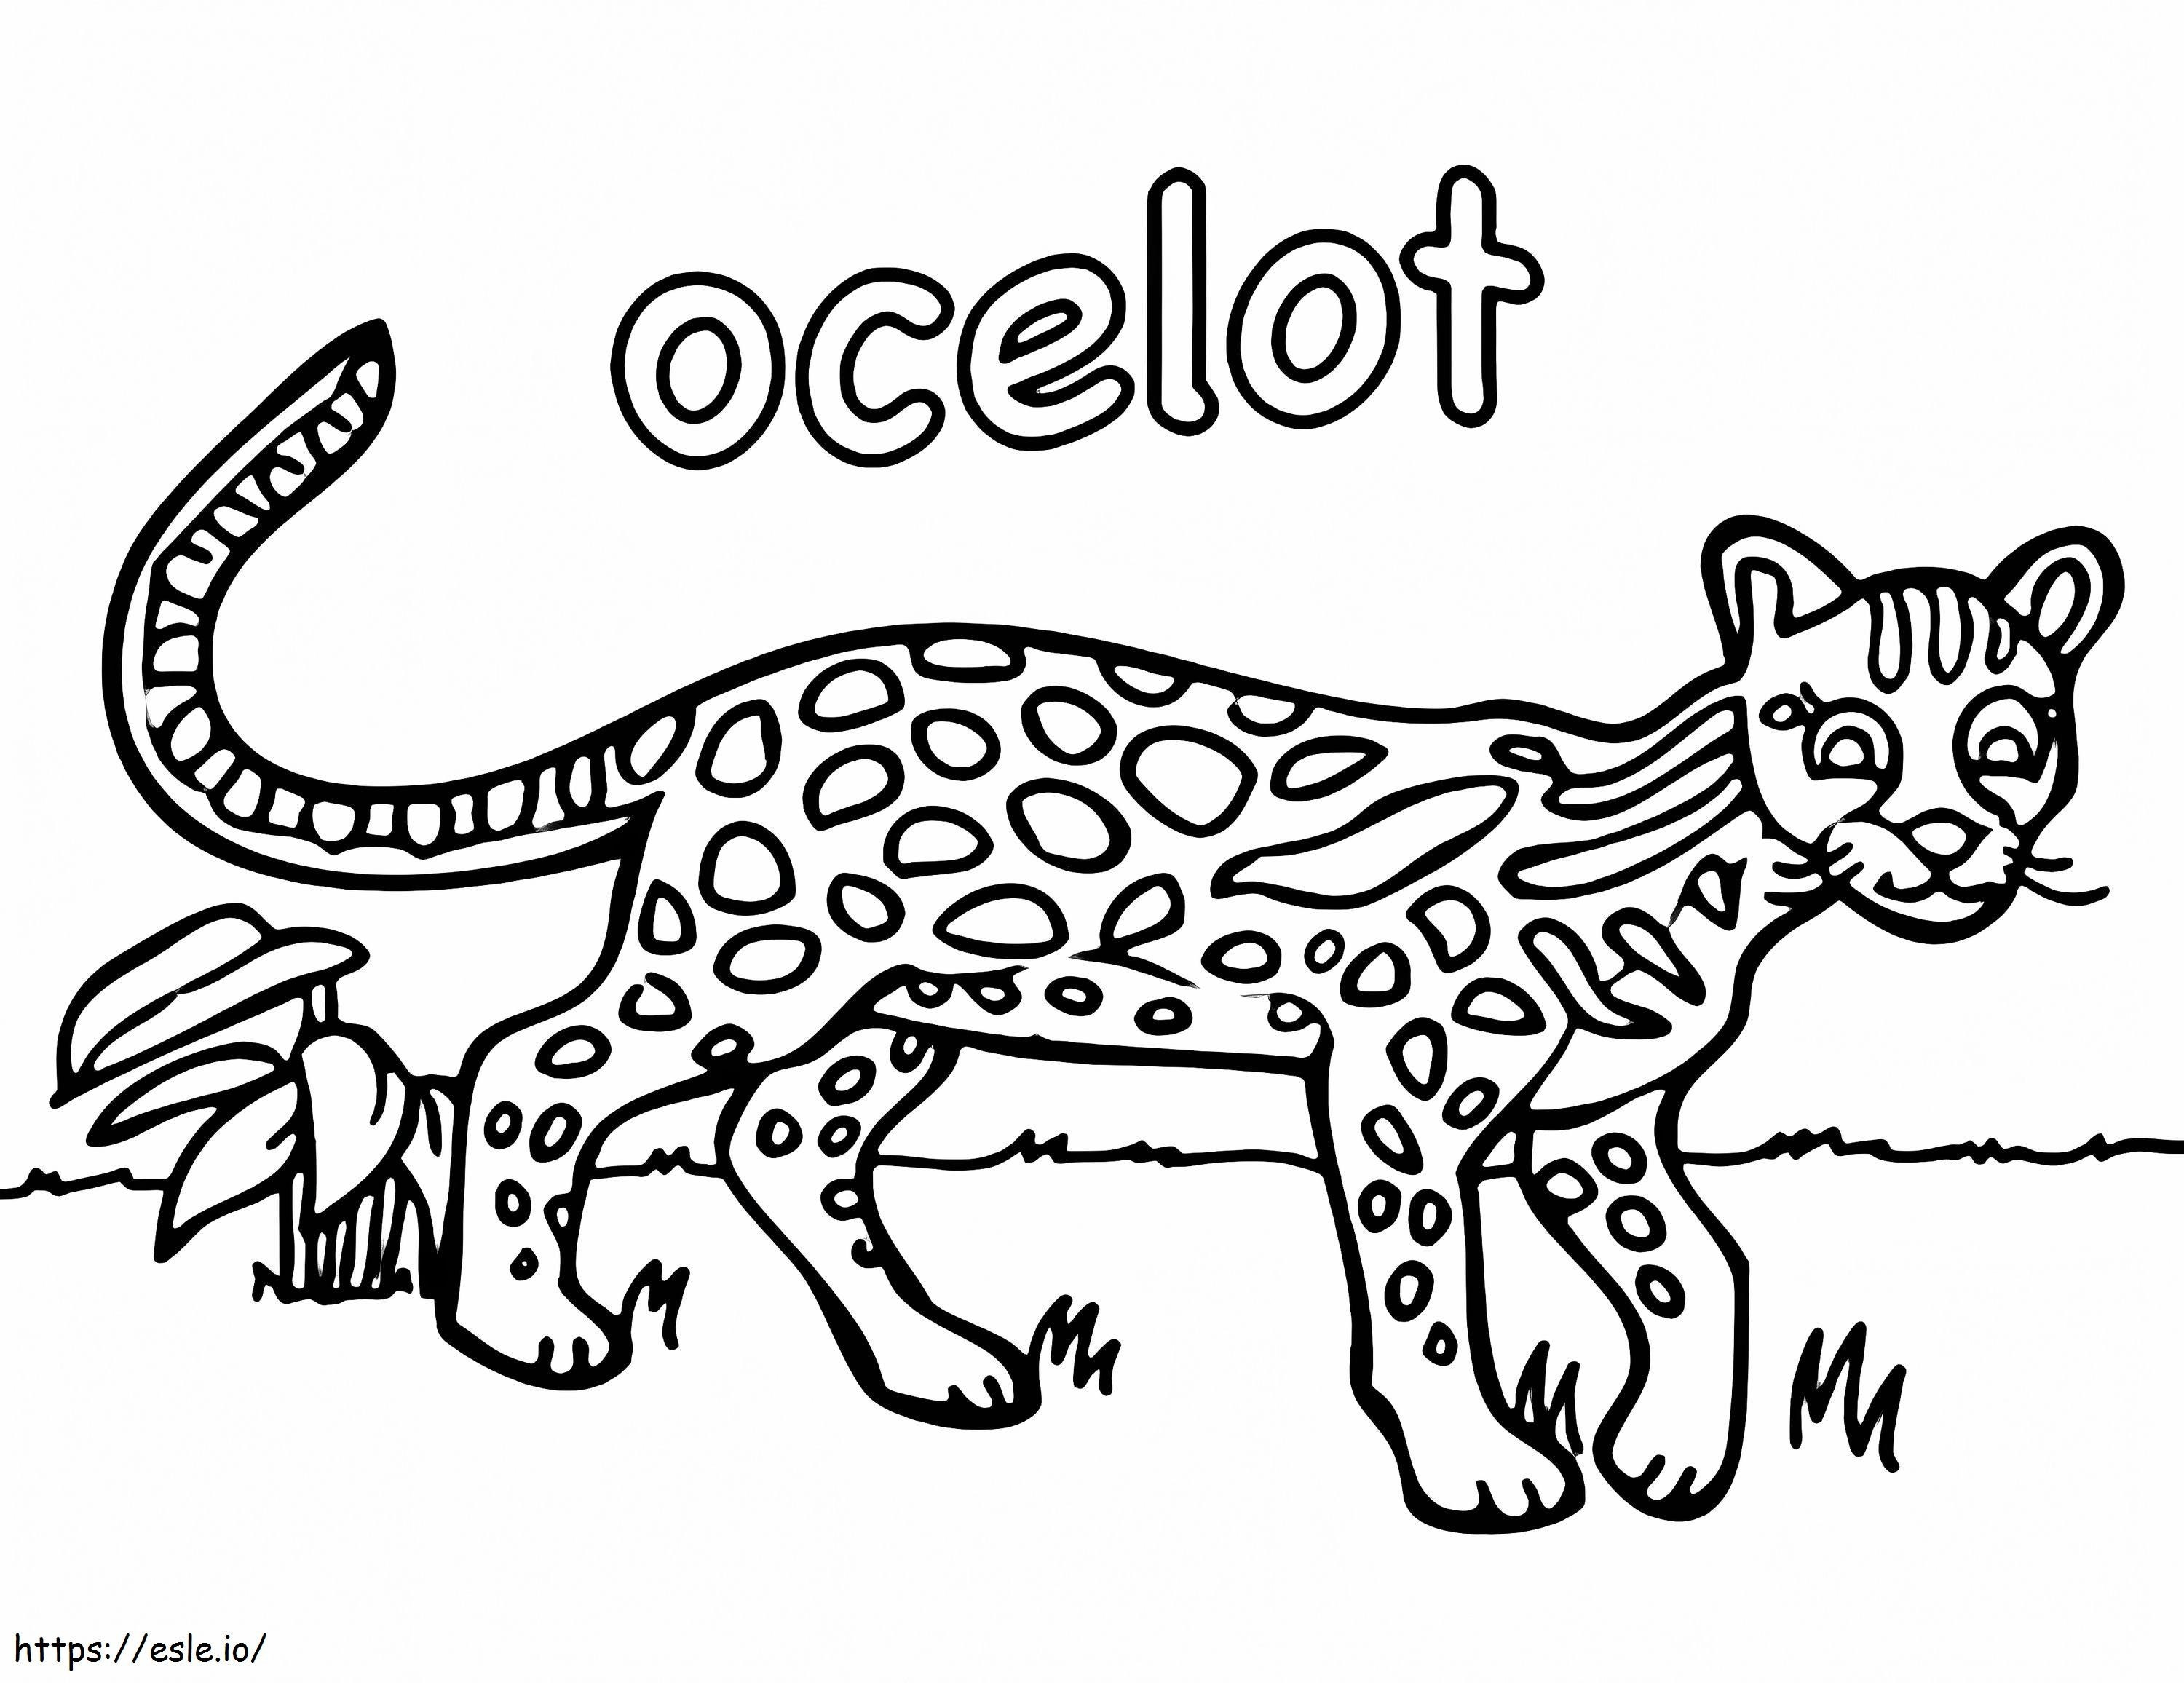 Funny Ocelot coloring page